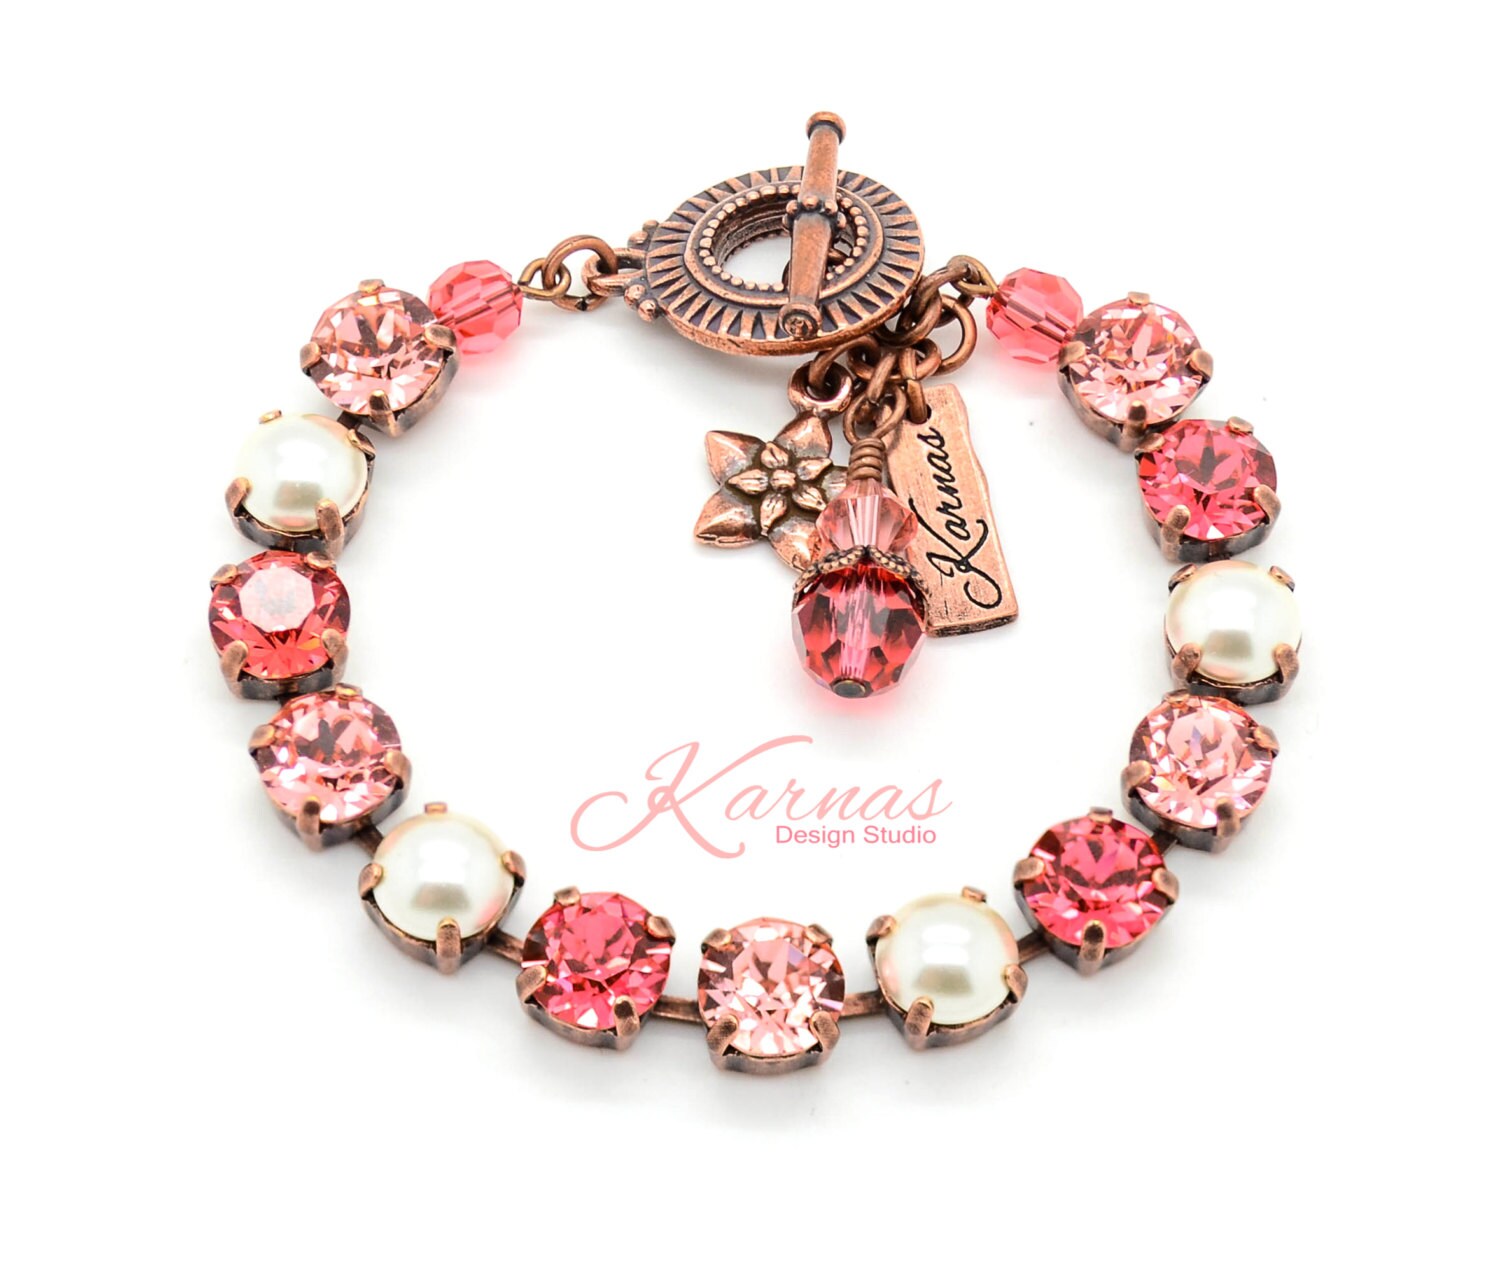 Crystal Sunset 8mm Crystal Chaton & Pearl Bracelet Made With Elements Pick Your Finish Karnas Design Studio Free Shipping